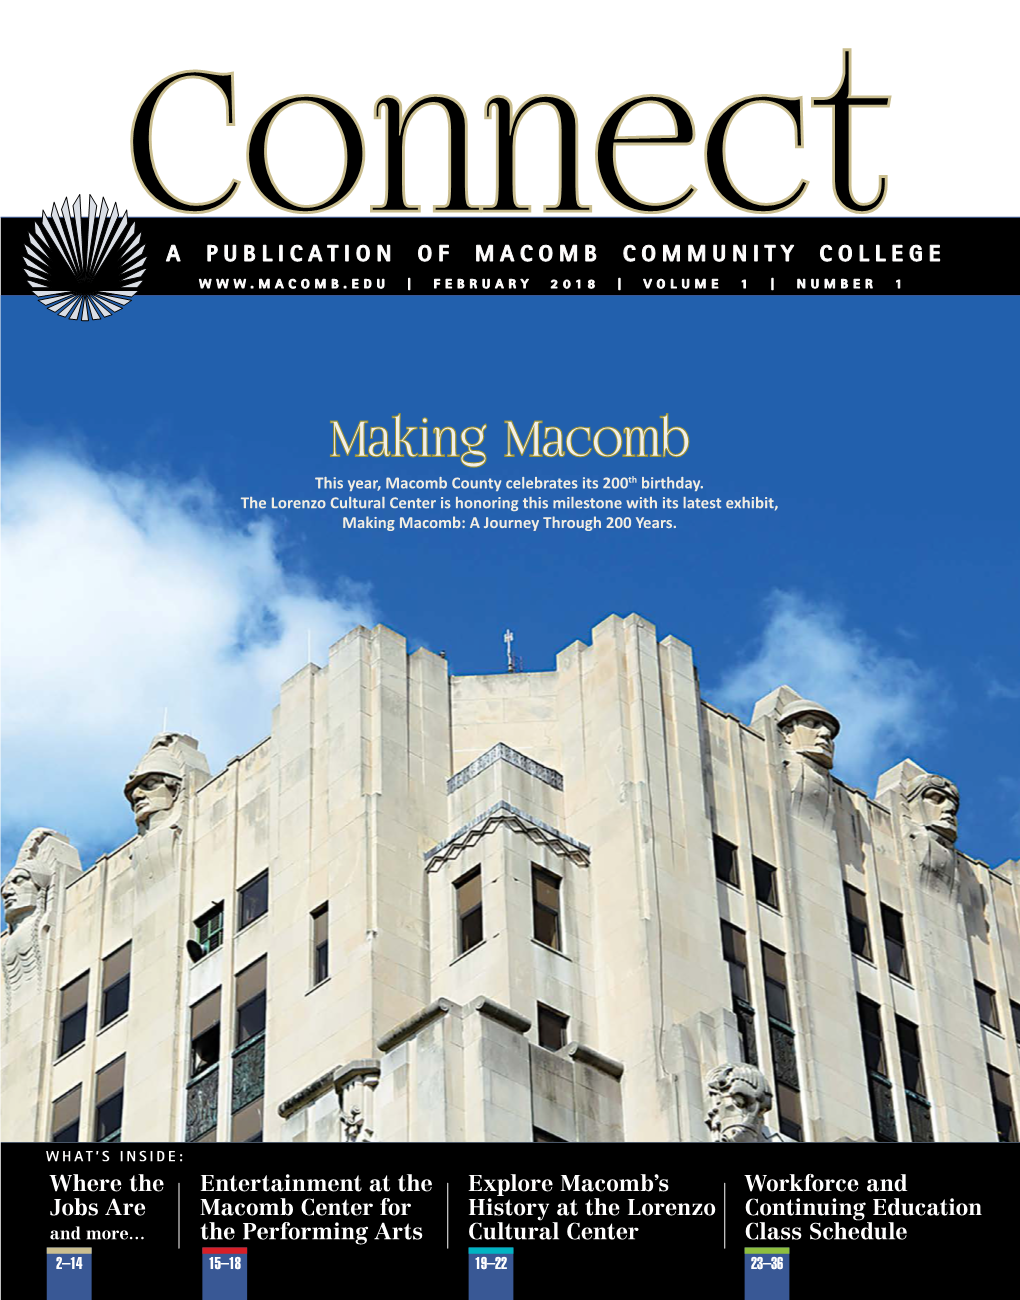 A Publication of Macomb Community College | February 2018 | Volume 1 | Number 1